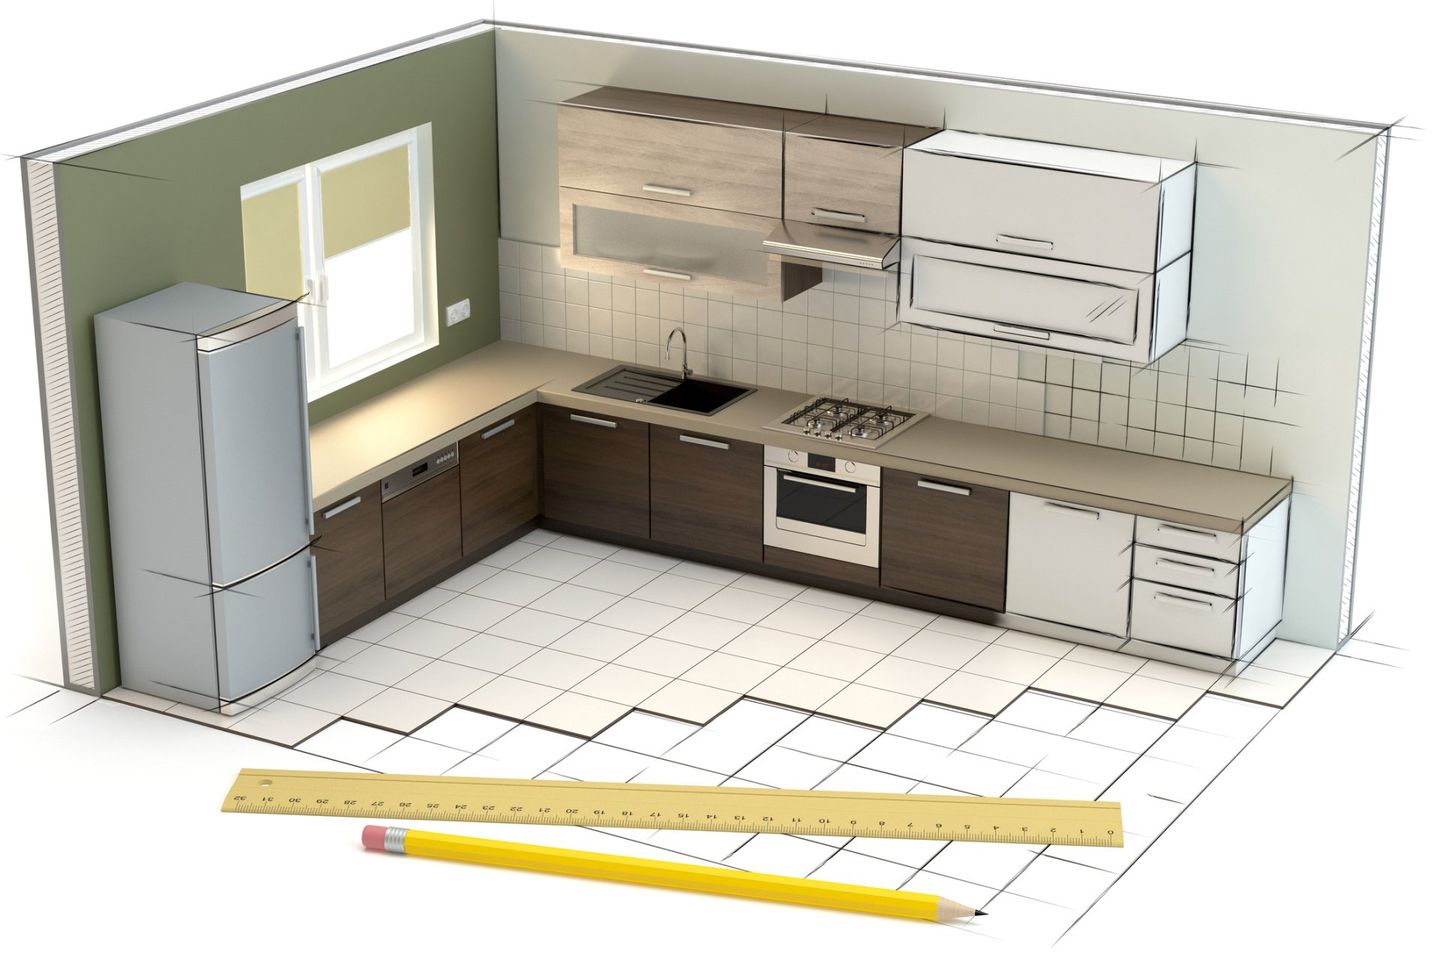 Project of kitchen, 3D illustration